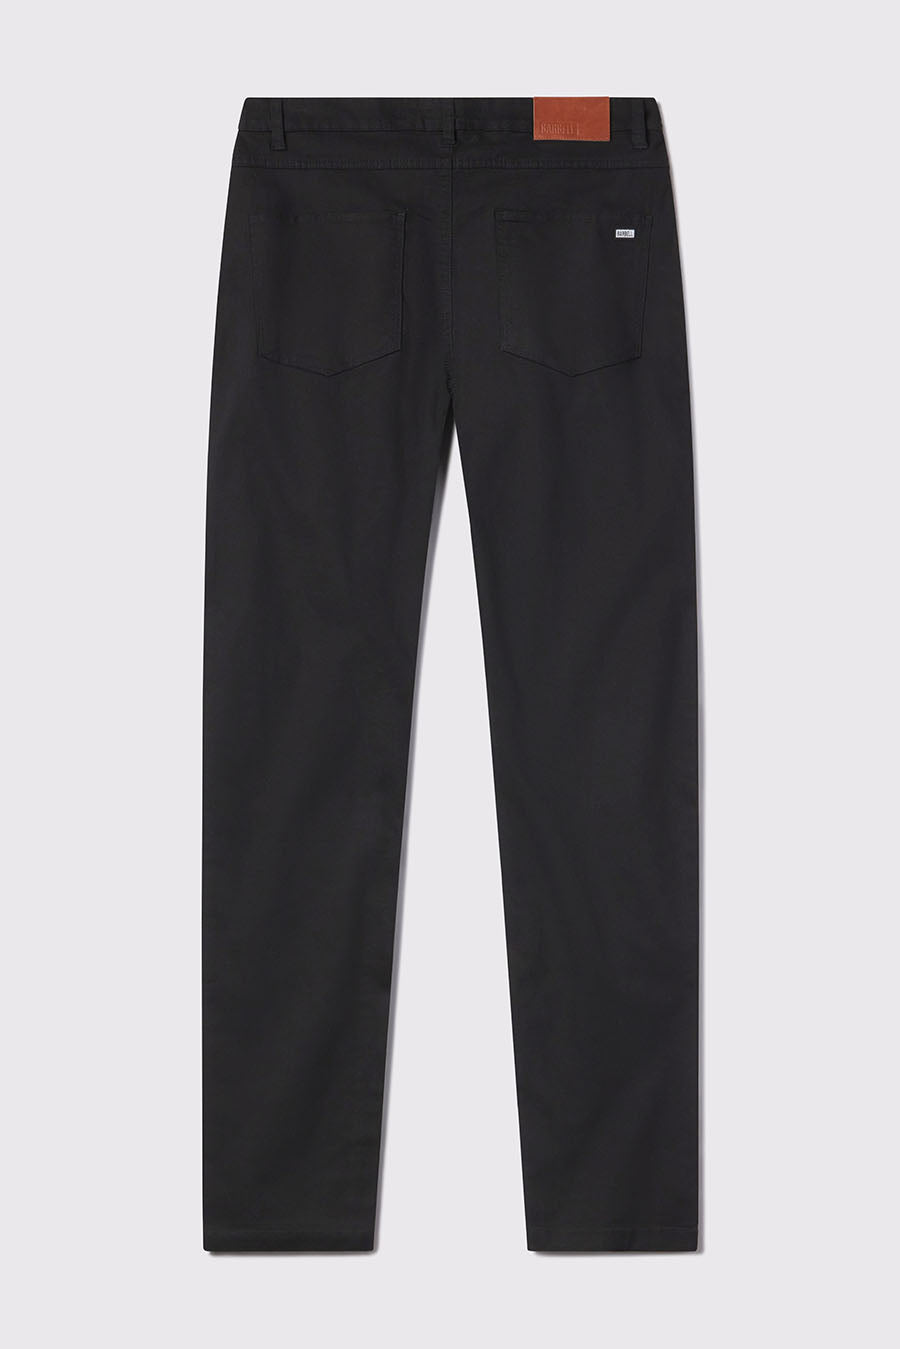 Athletic Fit Chino Pant 2.0 - Black - photo from back flat lay #color_black